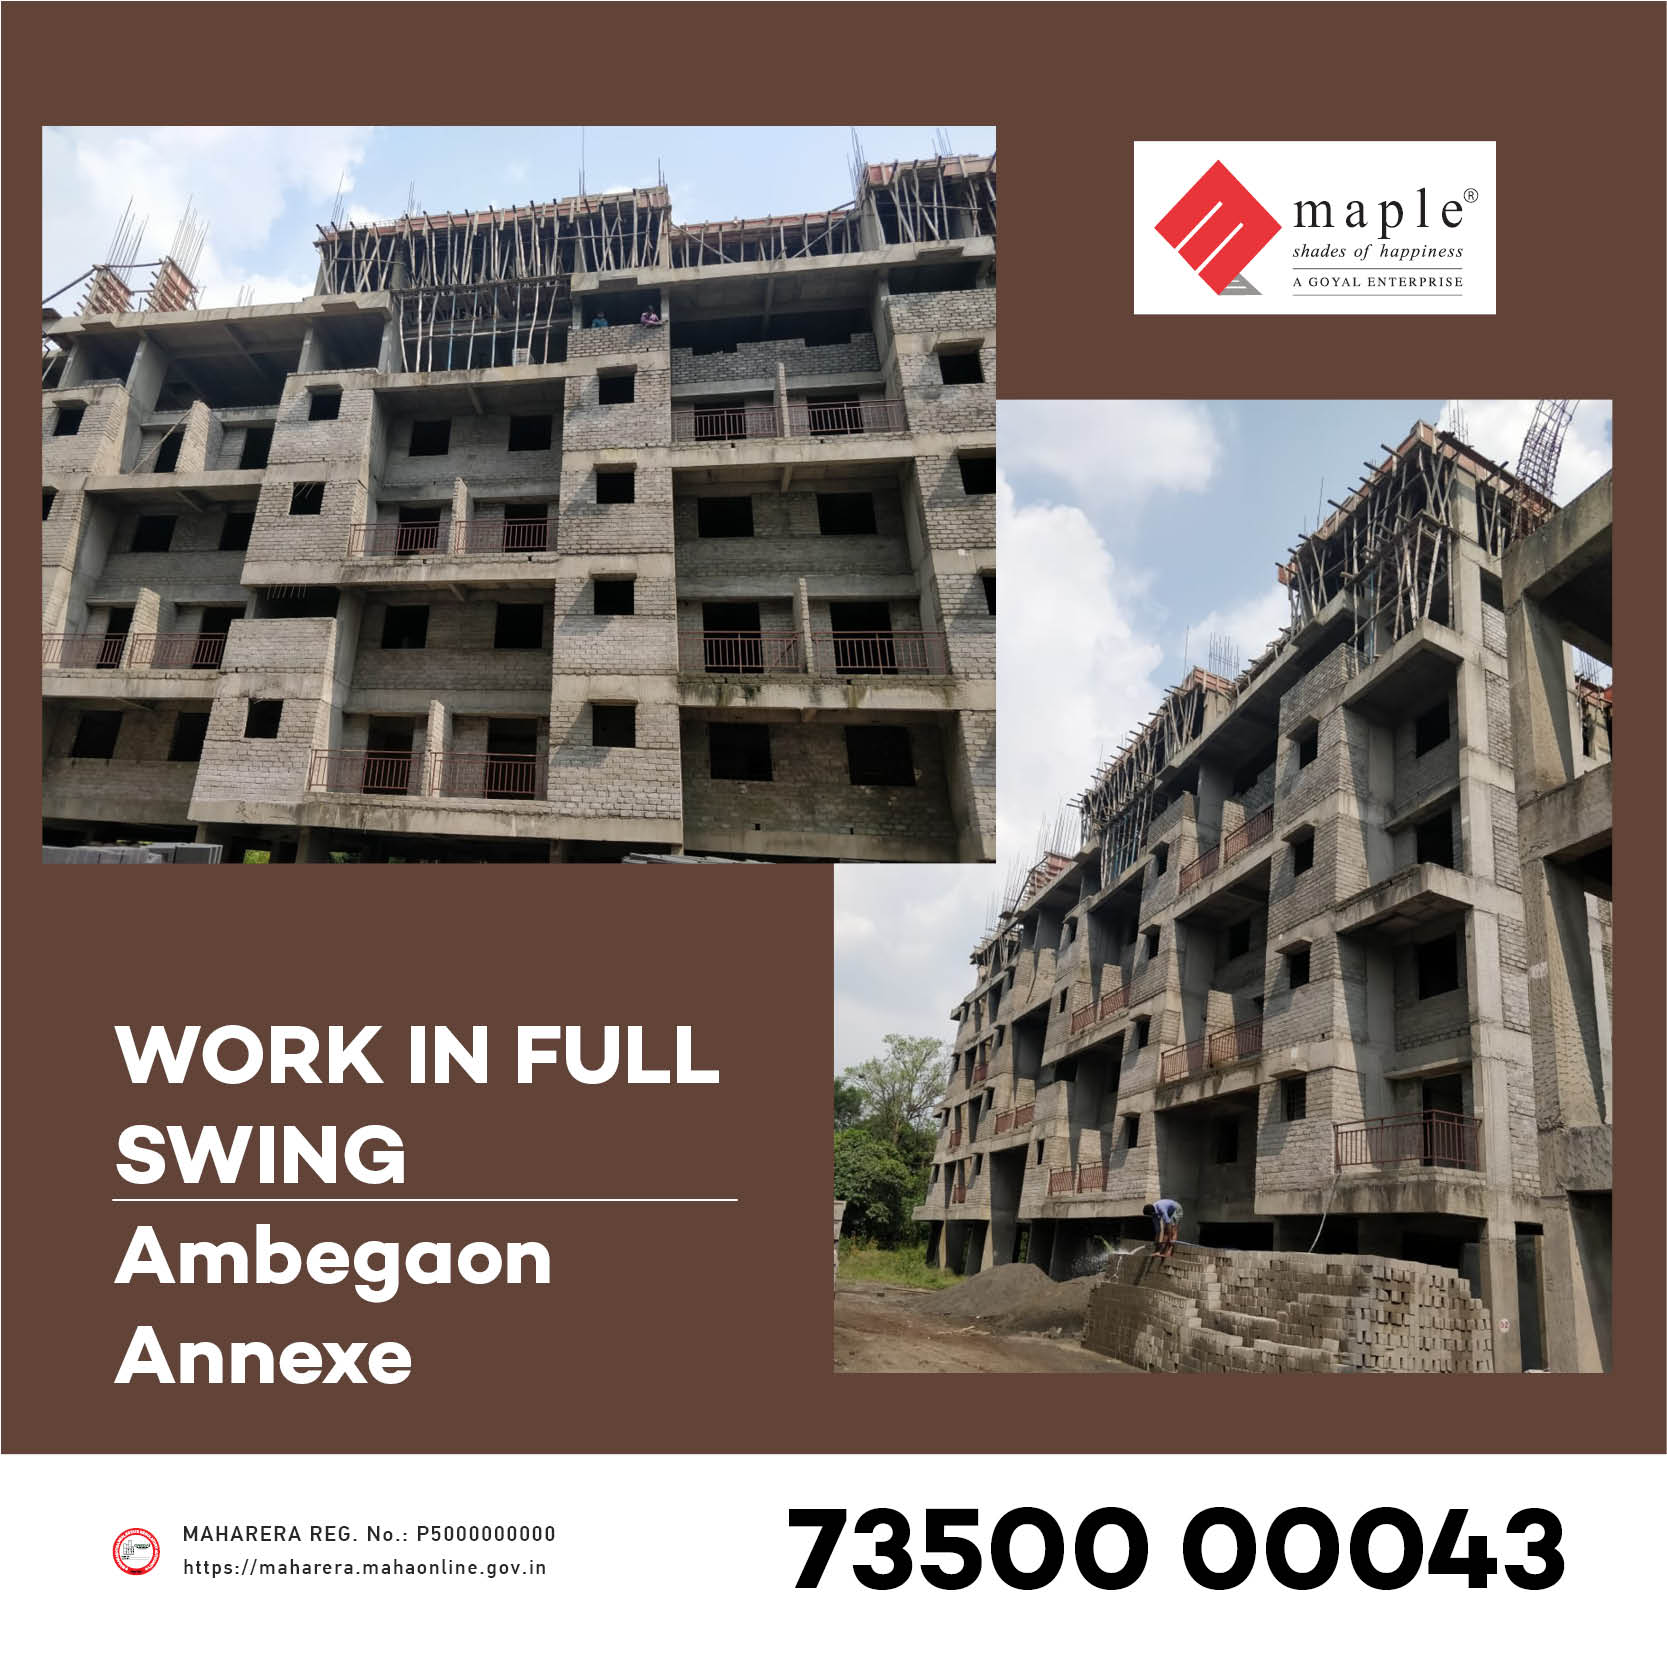 Maple Group, 1BHK NEAR TO POSSESSION IN AMBEGAON, CONSTRUCTION IN FULL SWING IN AMBEGAON, TOP 10 PROJECTS IN AMBEGAON, REAL ESTATE PROJECTS BY TOP BUILDERS IN PUNE, 2BHK APARTMENTS FOR SALE IN AMBEGAON.